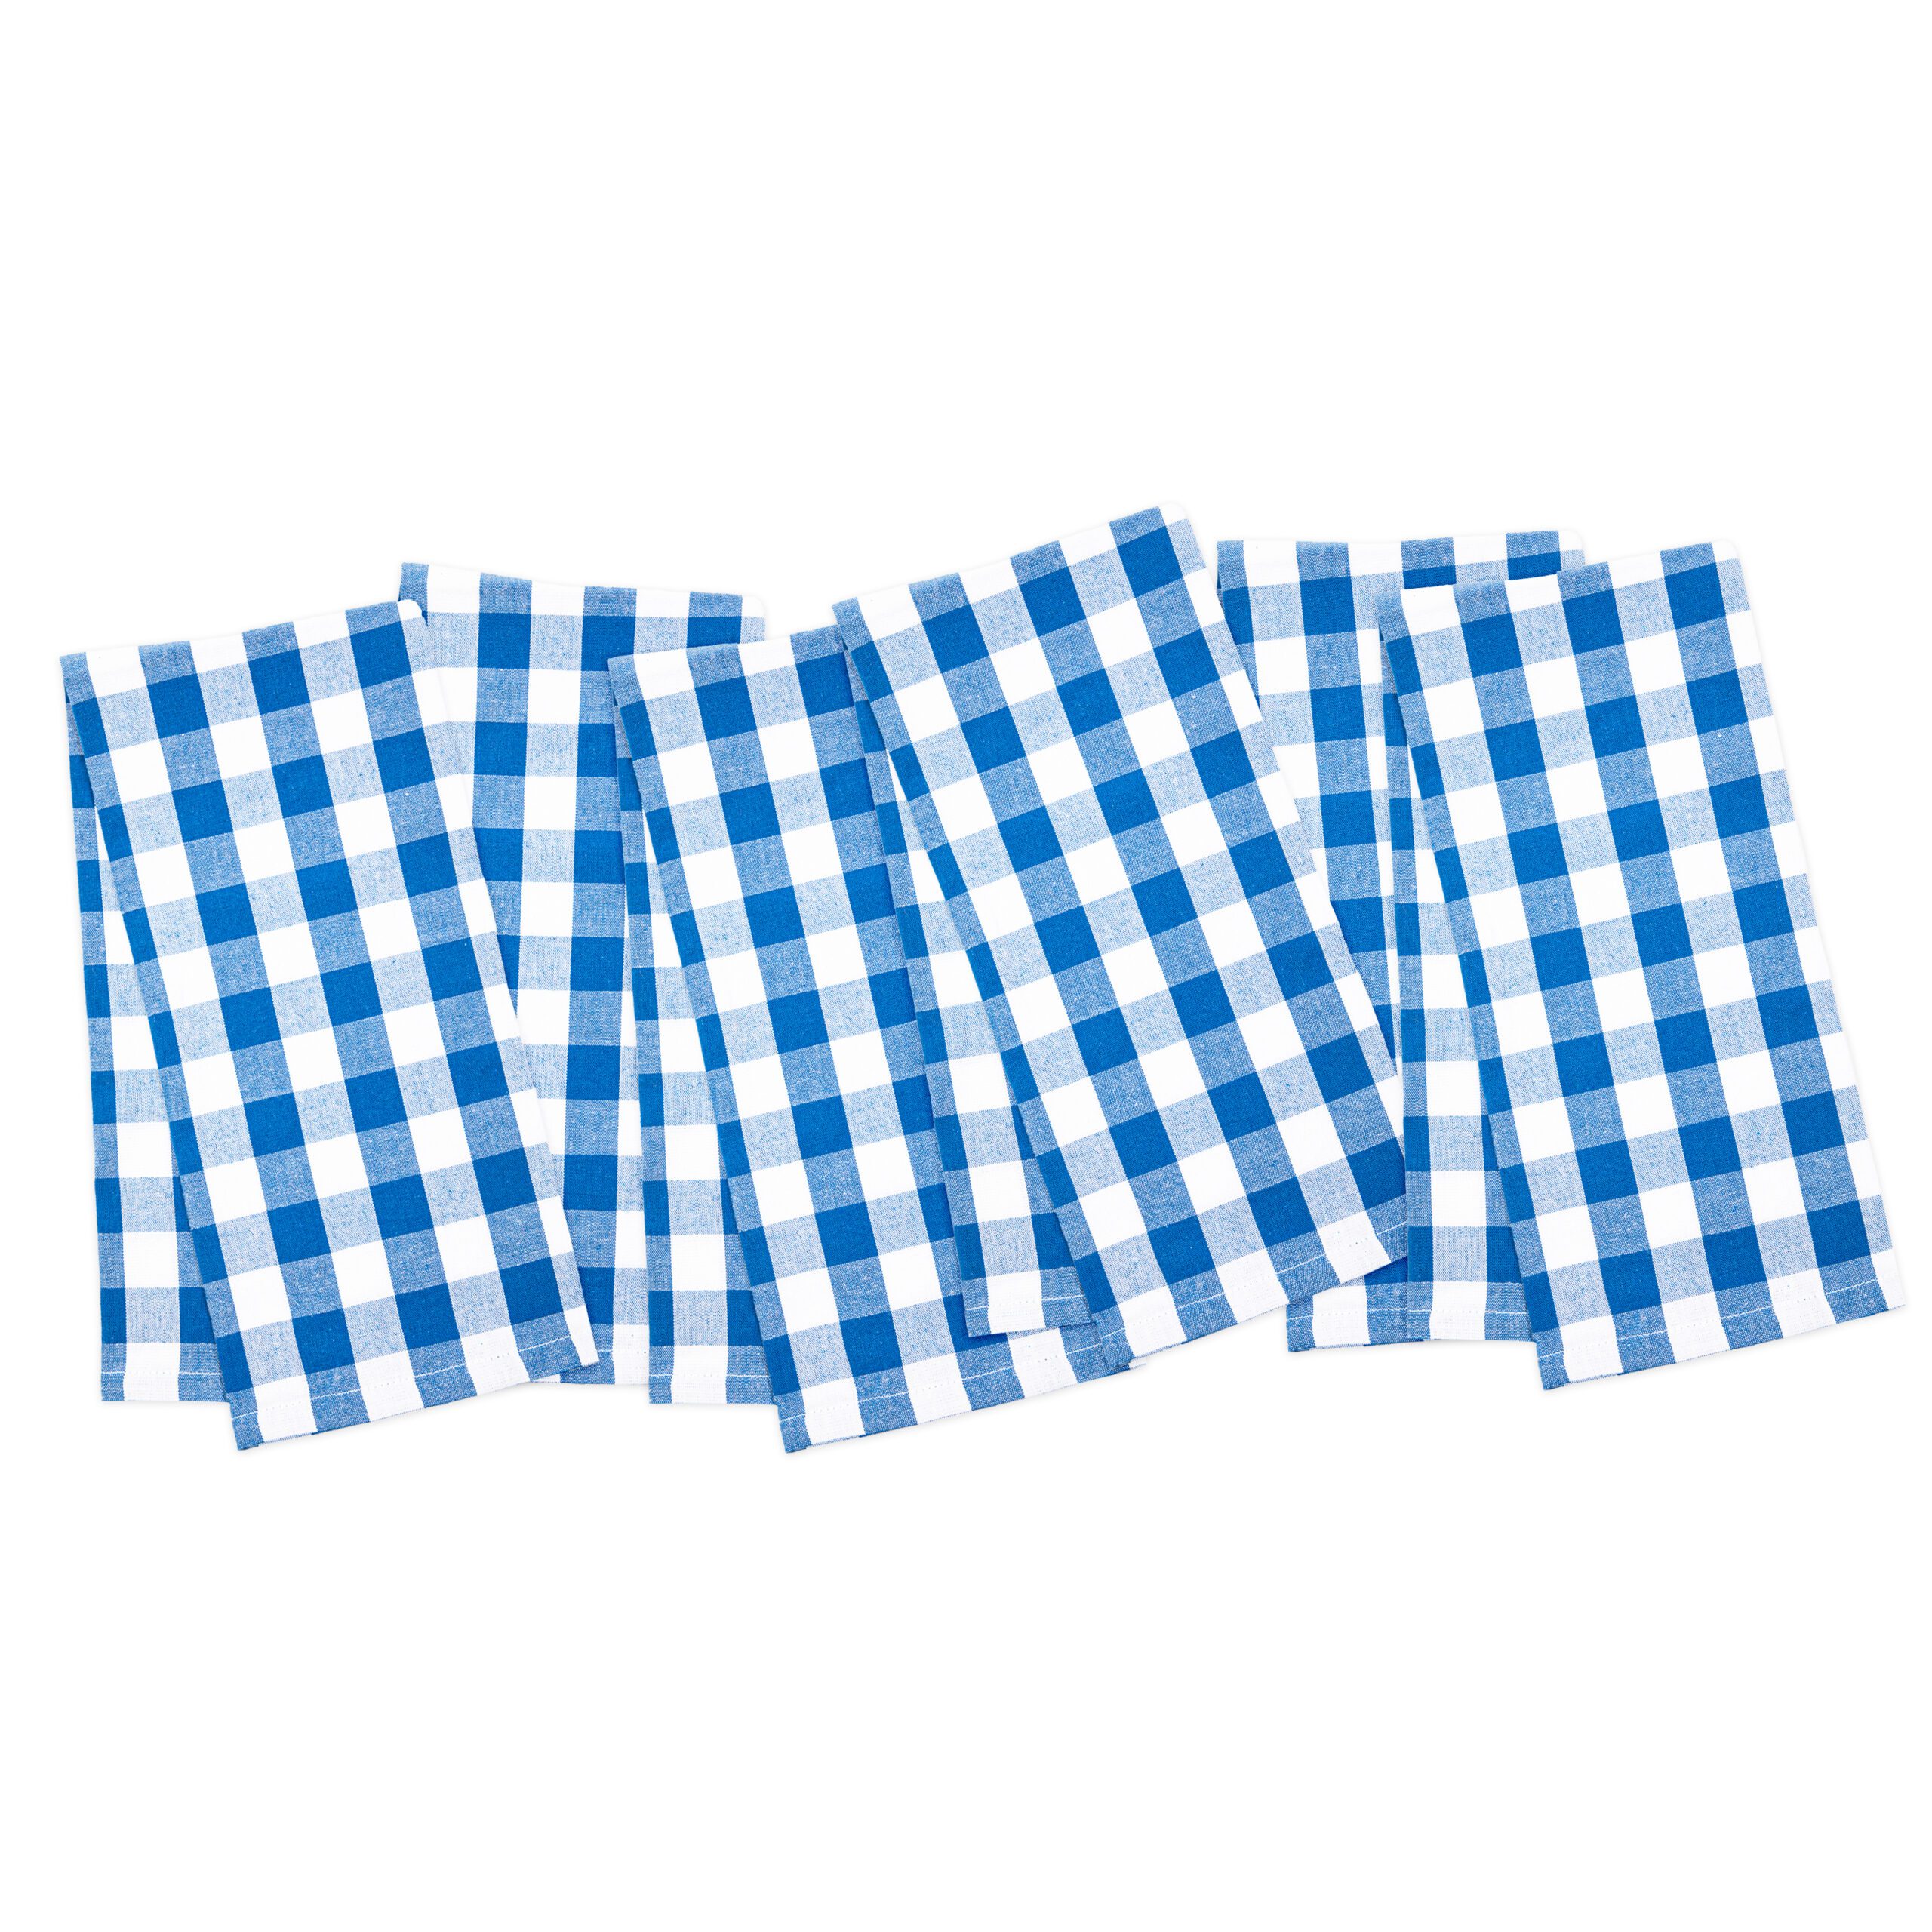 Sloppy Chef Buffalo Plaid Kitchen Towel 6-Pack, 20x30 in., Six Colors, Buy A 6-Pack or Buy A Bulk Case of 144, Blue